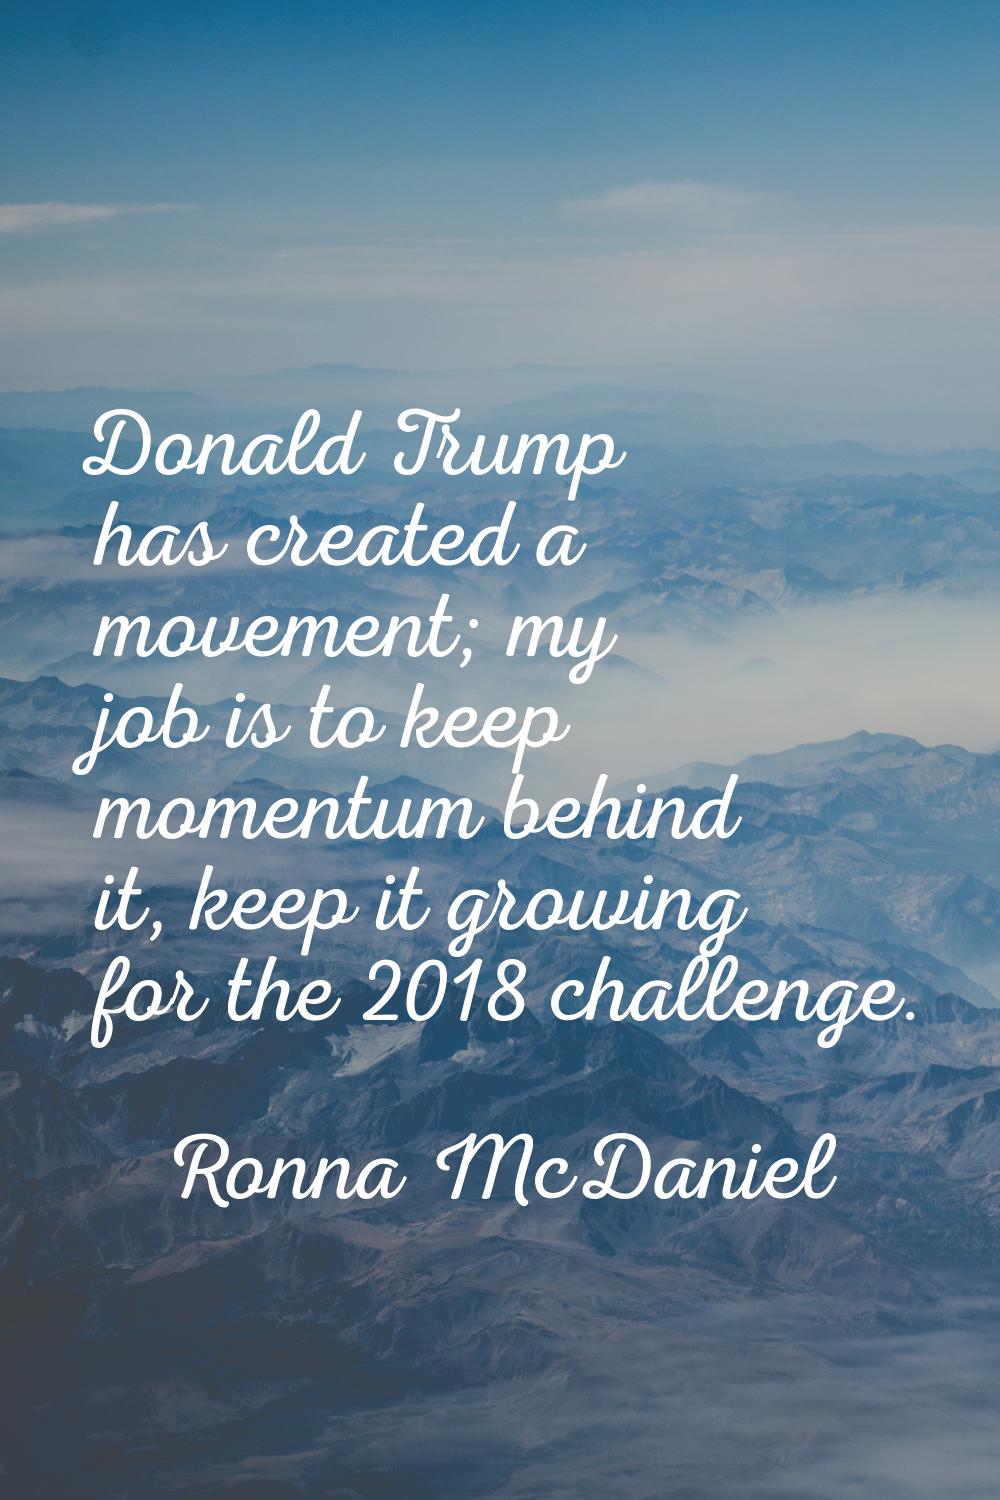 Donald Trump has created a movement; my job is to keep momentum behind it, keep it growing for the 